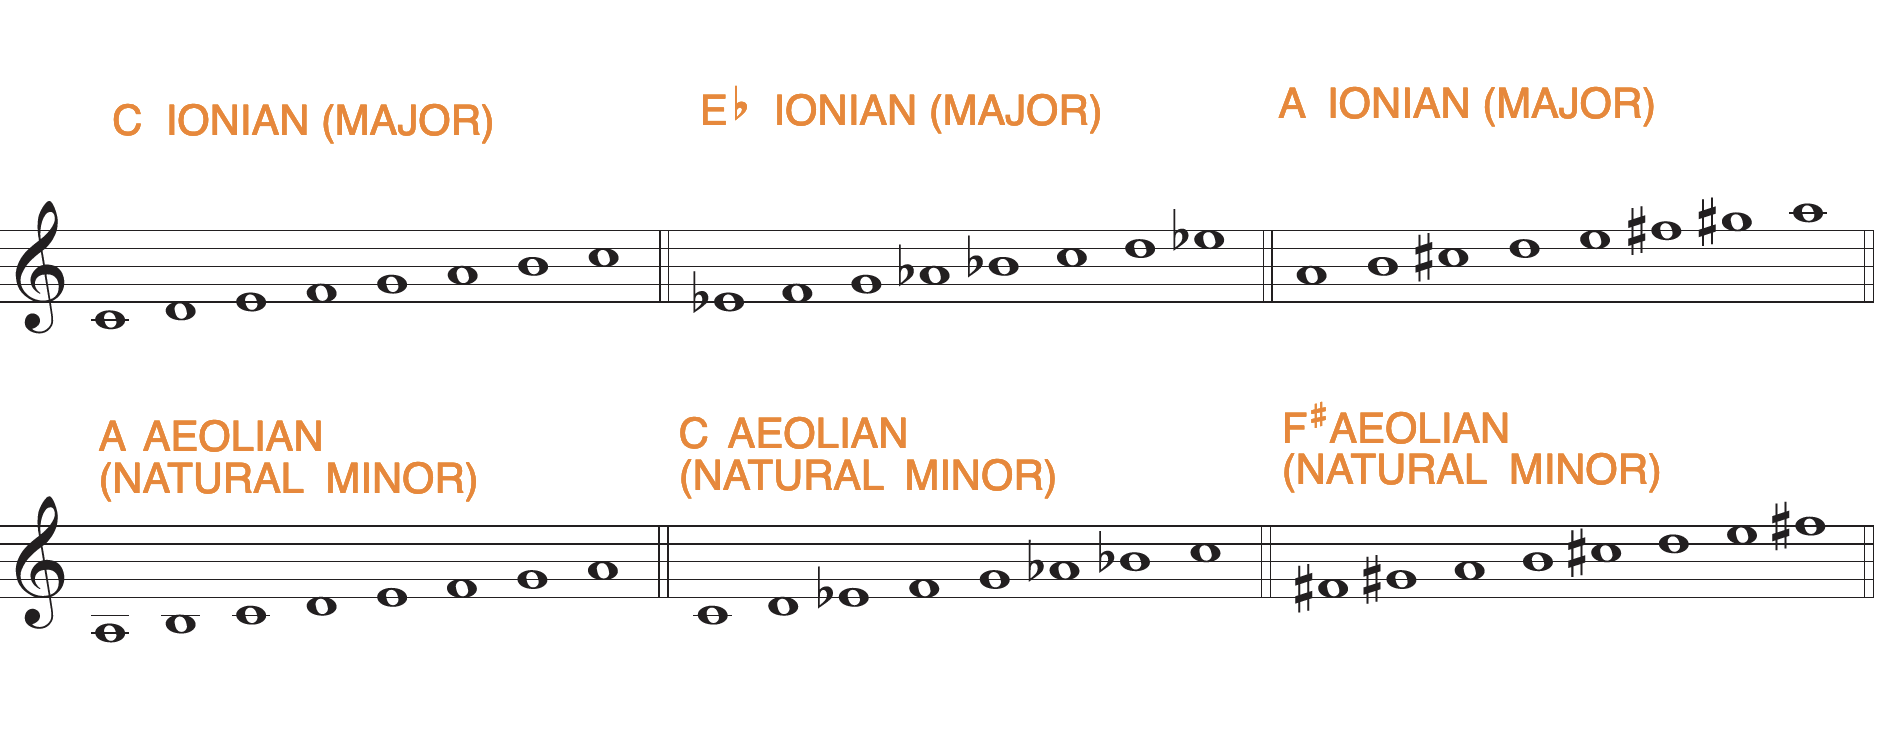 Major Ionian mode scales and their relative minor Aeolian scales.